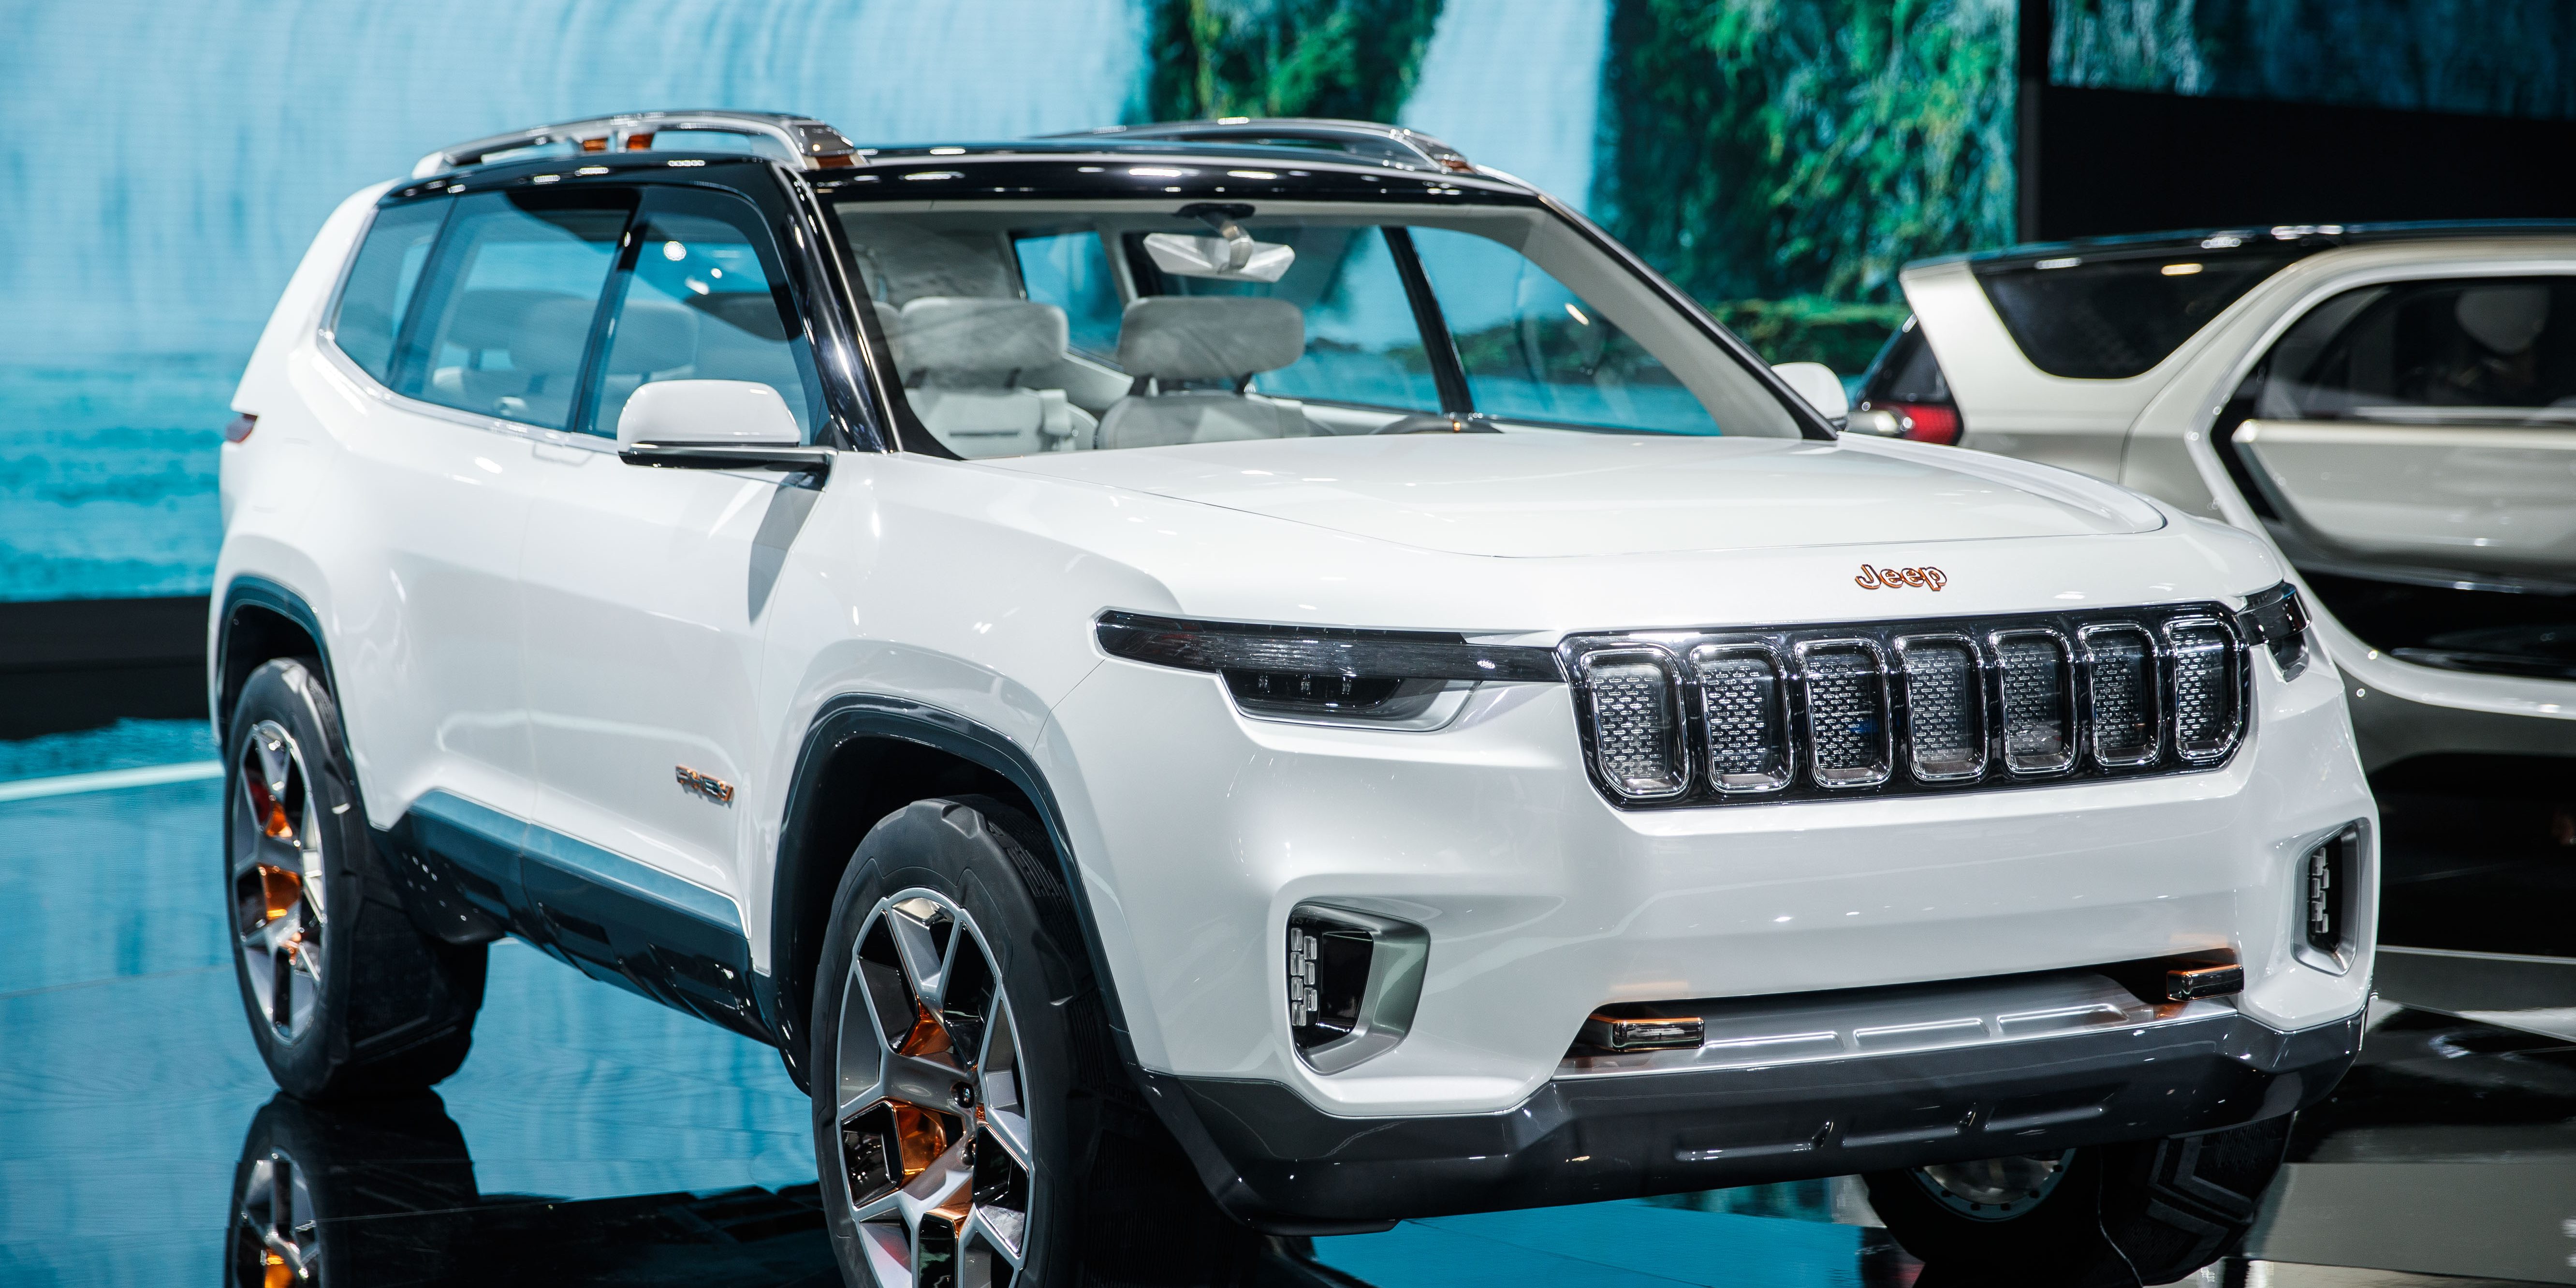 Jeep's plugin hybrid SUV concept debuts with a 40 miles allelectric